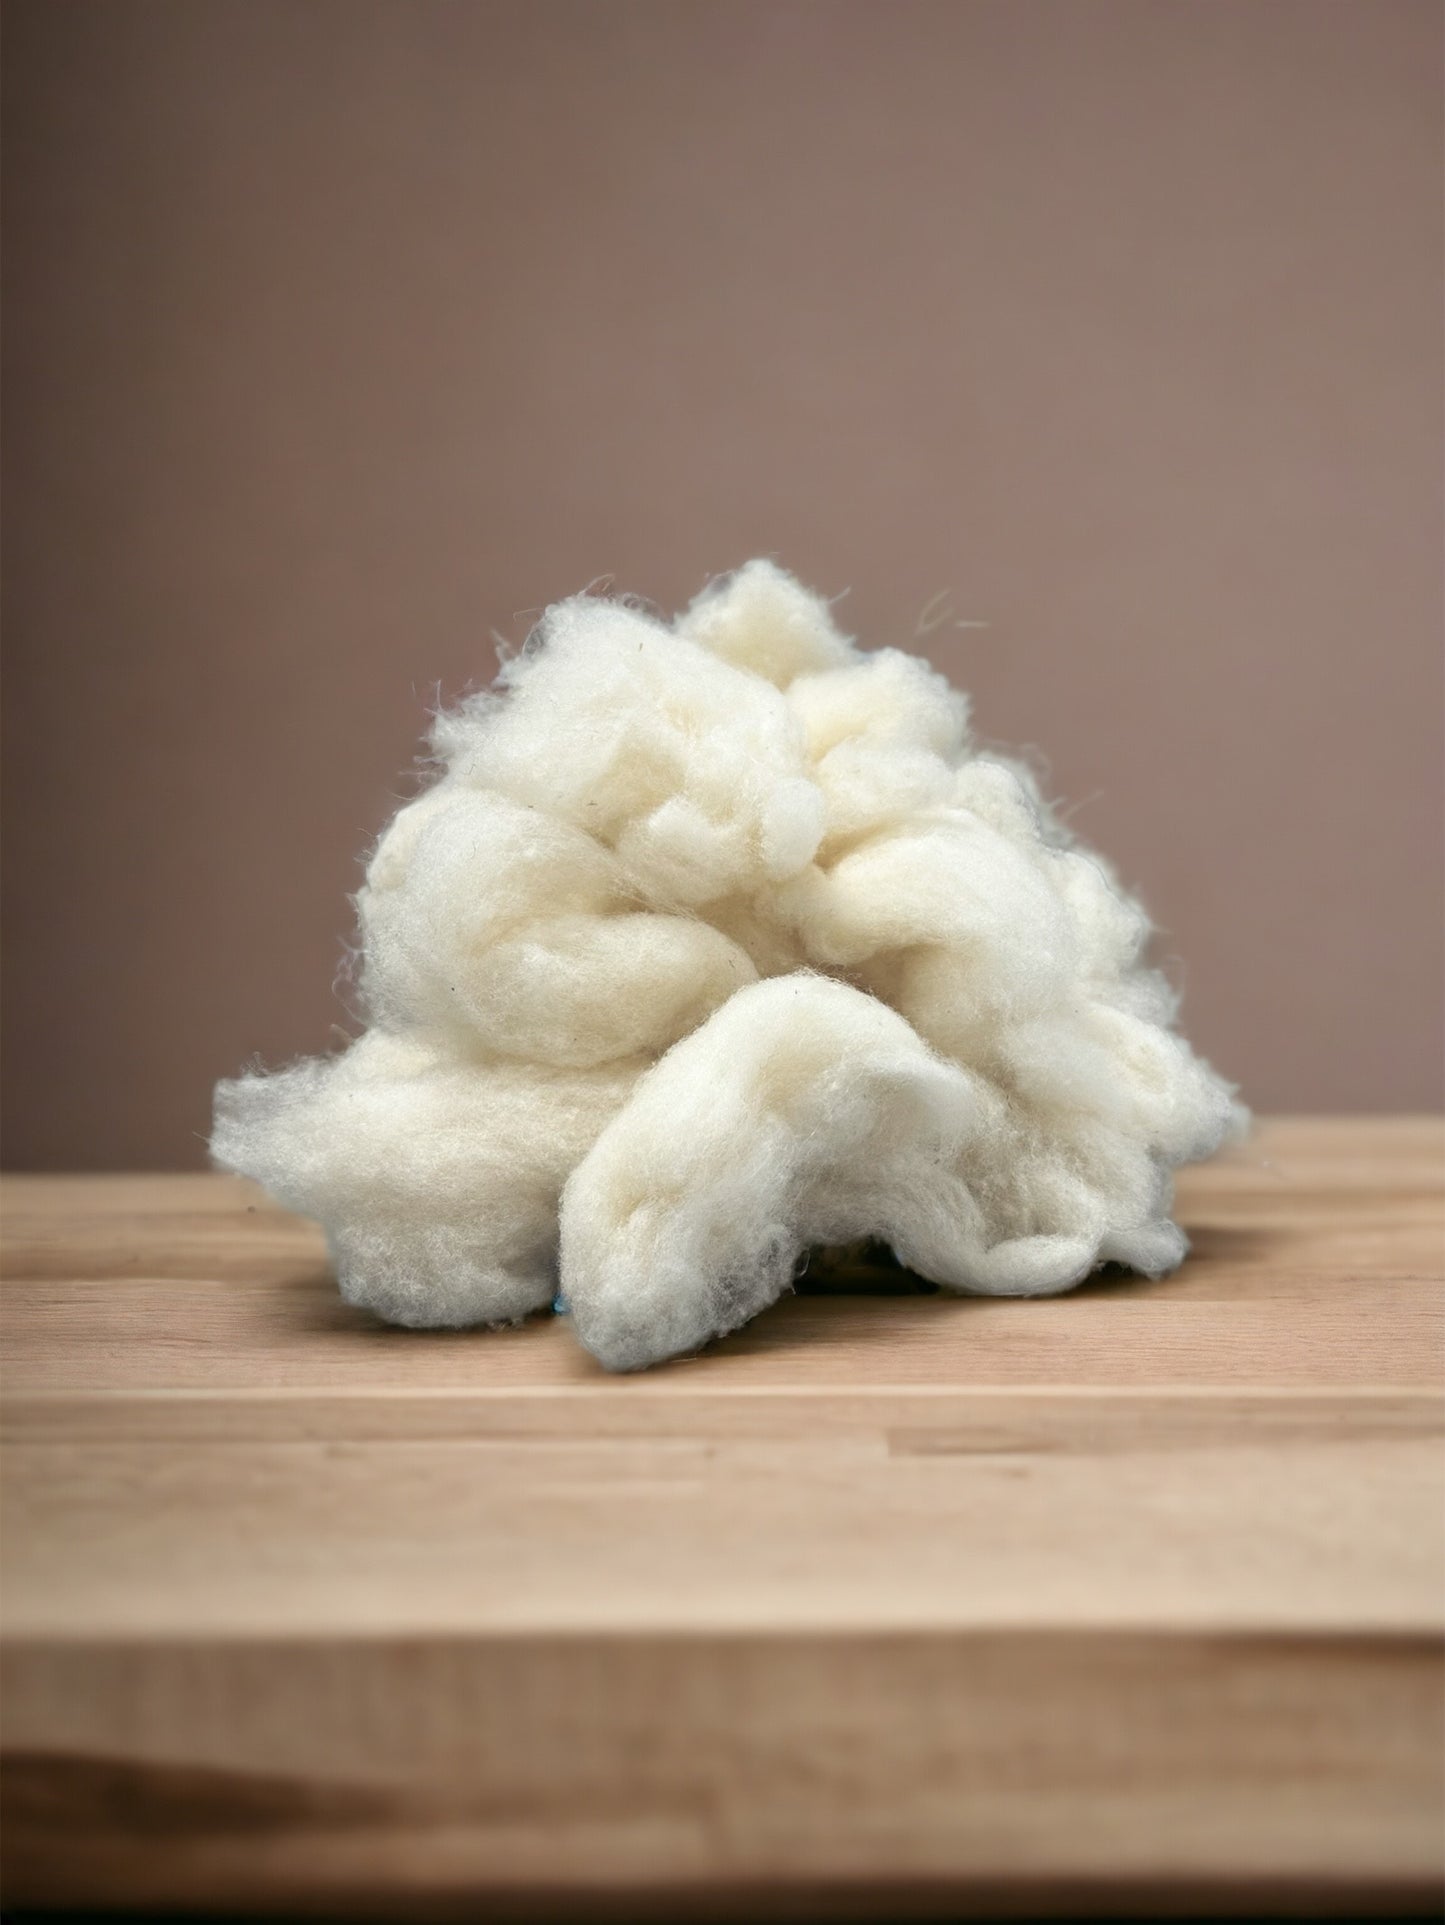 Organic wool for filling